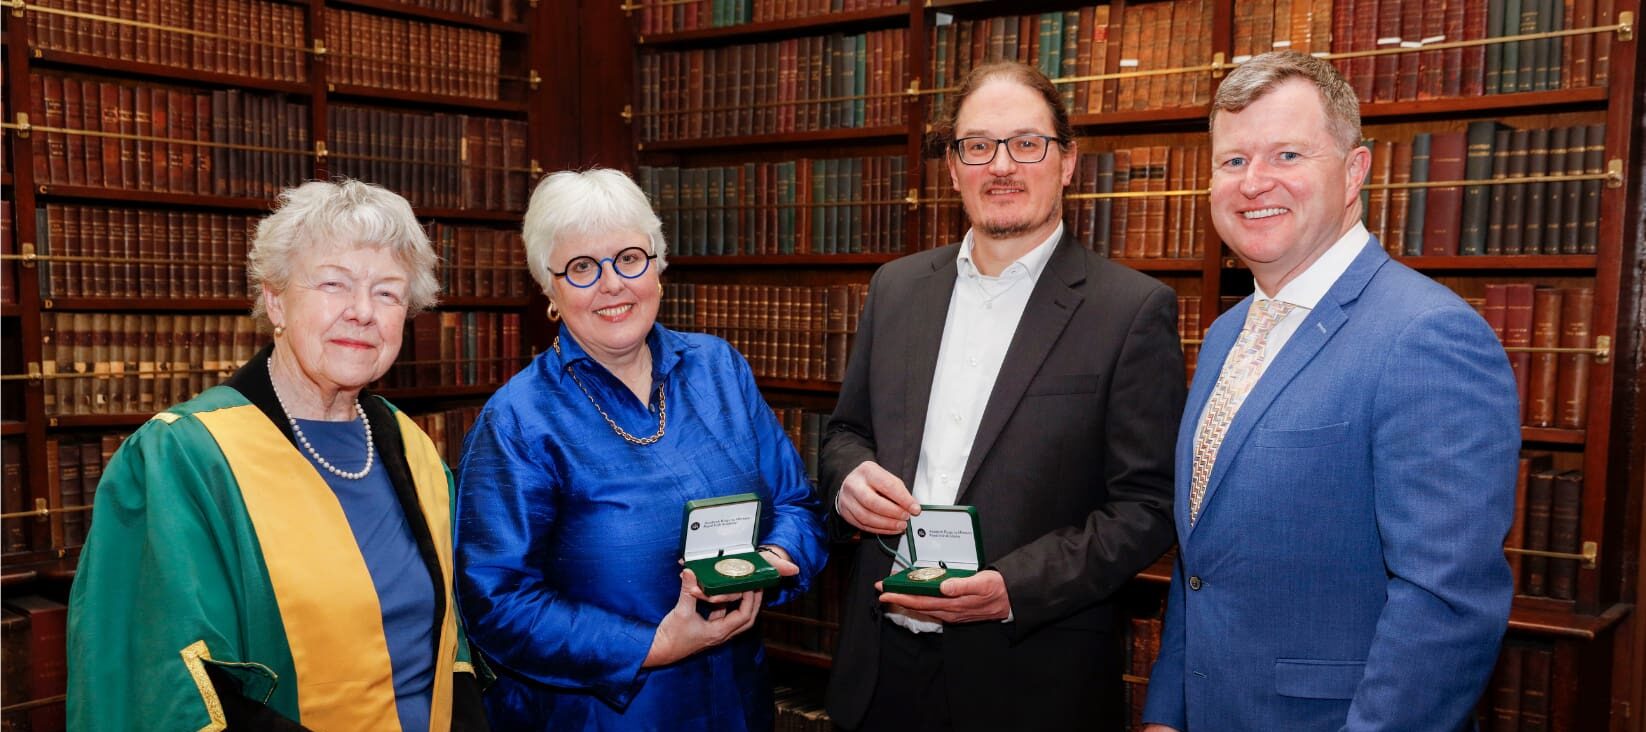 Four people standing in a row in front of a walled book shelf smiling at the camera. A woman [Dr Mary Canning, President of the Royal Irish Academy (2020-2023)] stands to the left, a man (Jonathan N. Coleman MRIA, 2023 RIA Gold Medallist in the Physical and Mathematical Sciences) and a woman (Jane Ohlmeyer MRIA, 2023 RIA Gold Medallist in the Humanities) stand in the centre, both of them are holding a green case containing a gold medal. A man (Senator Malcolm Byrne, Fianna Fáil's Spokesperson on Further and Higher Education, Research, Innovation and Science) stands on the right after presenting the Gold Medals to the winners.